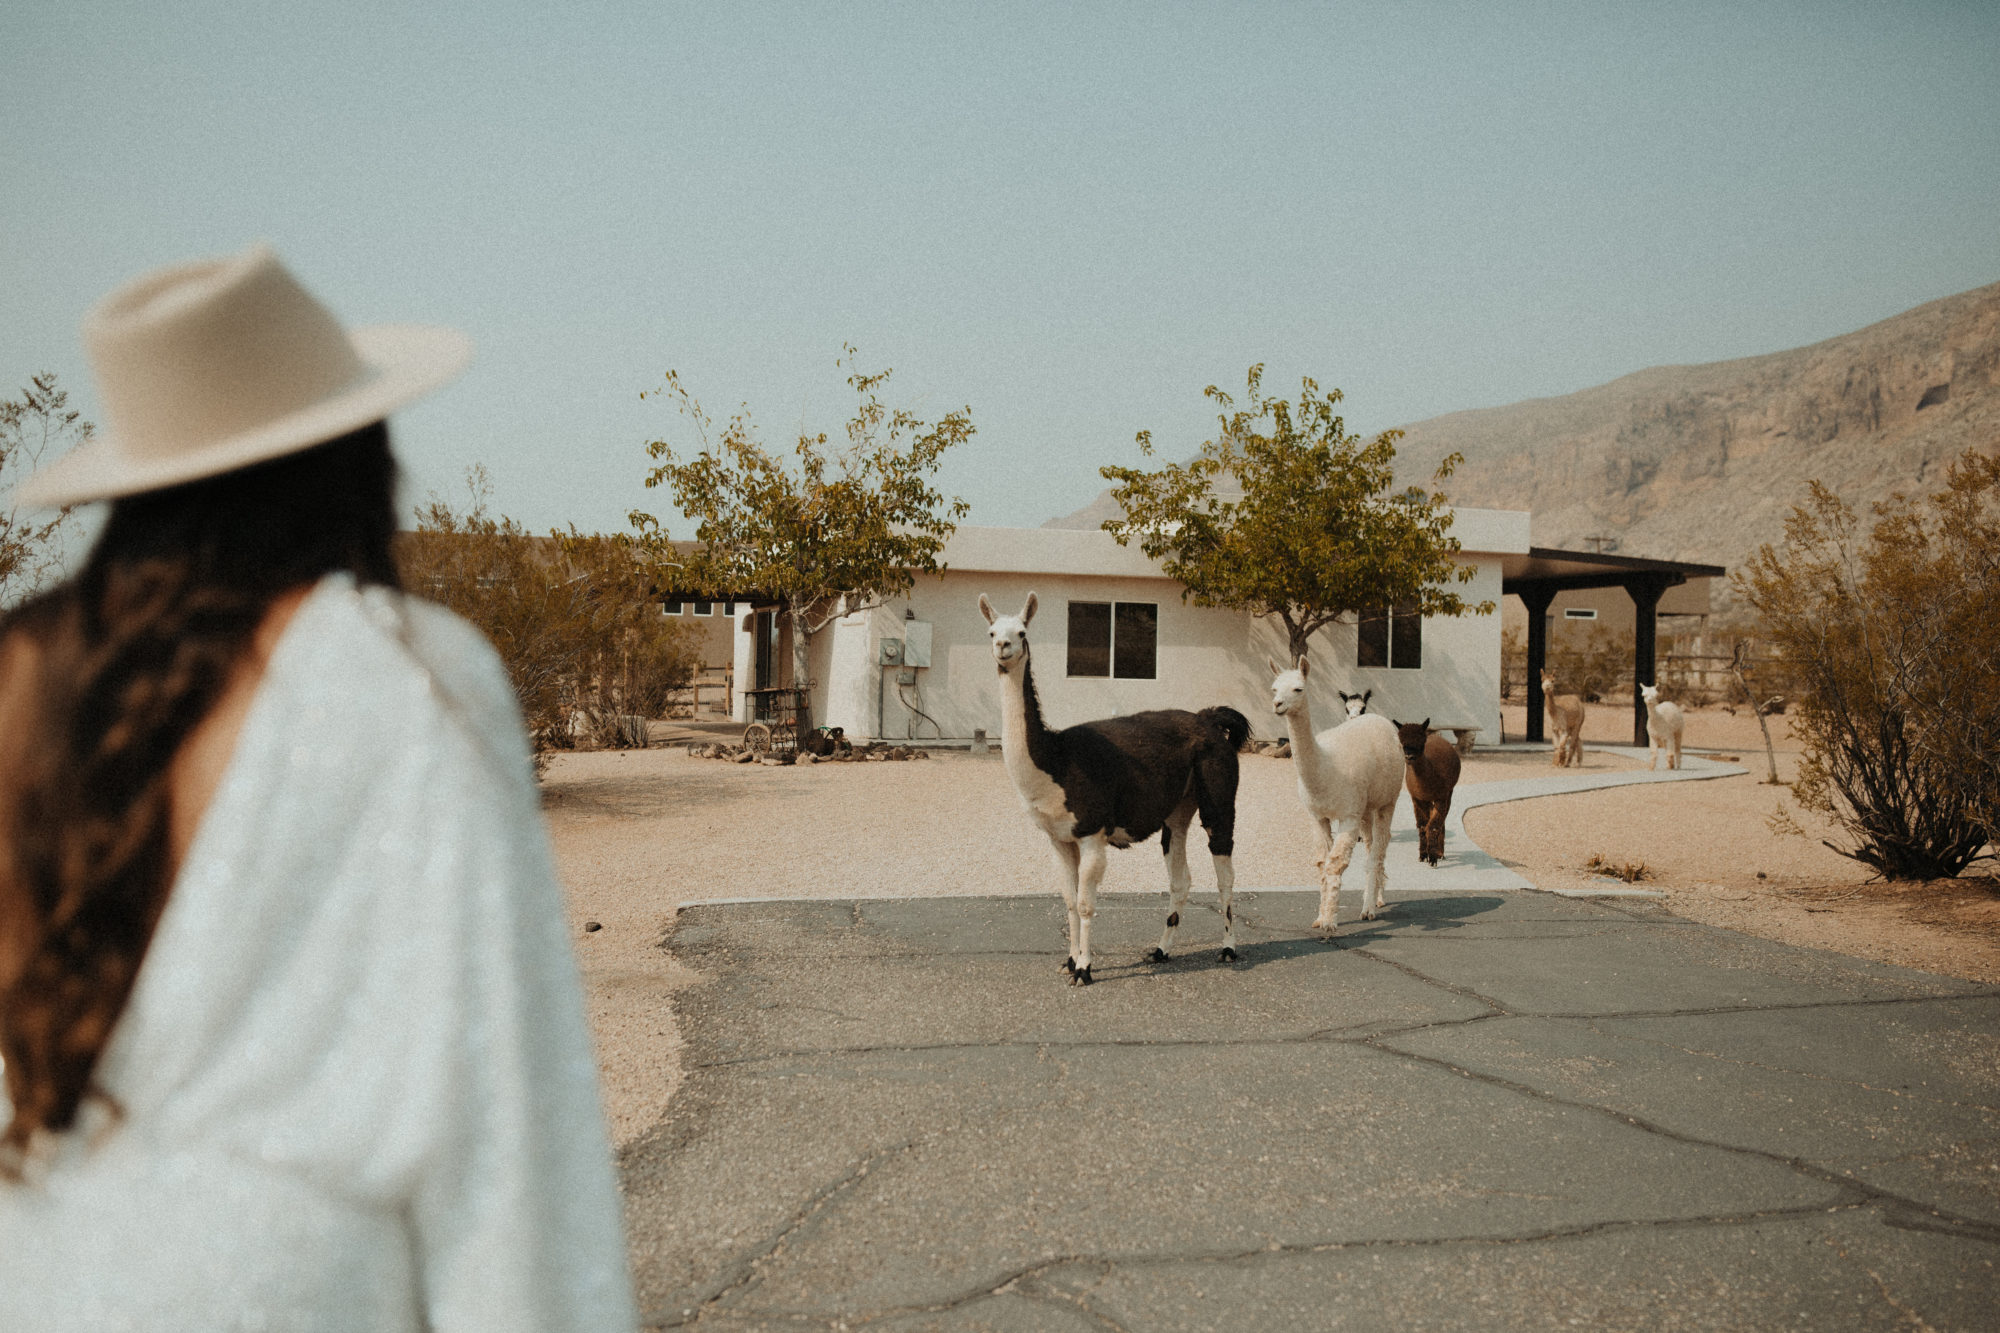 Boho Desert Bride in the corner of the image and some llamas across the road 